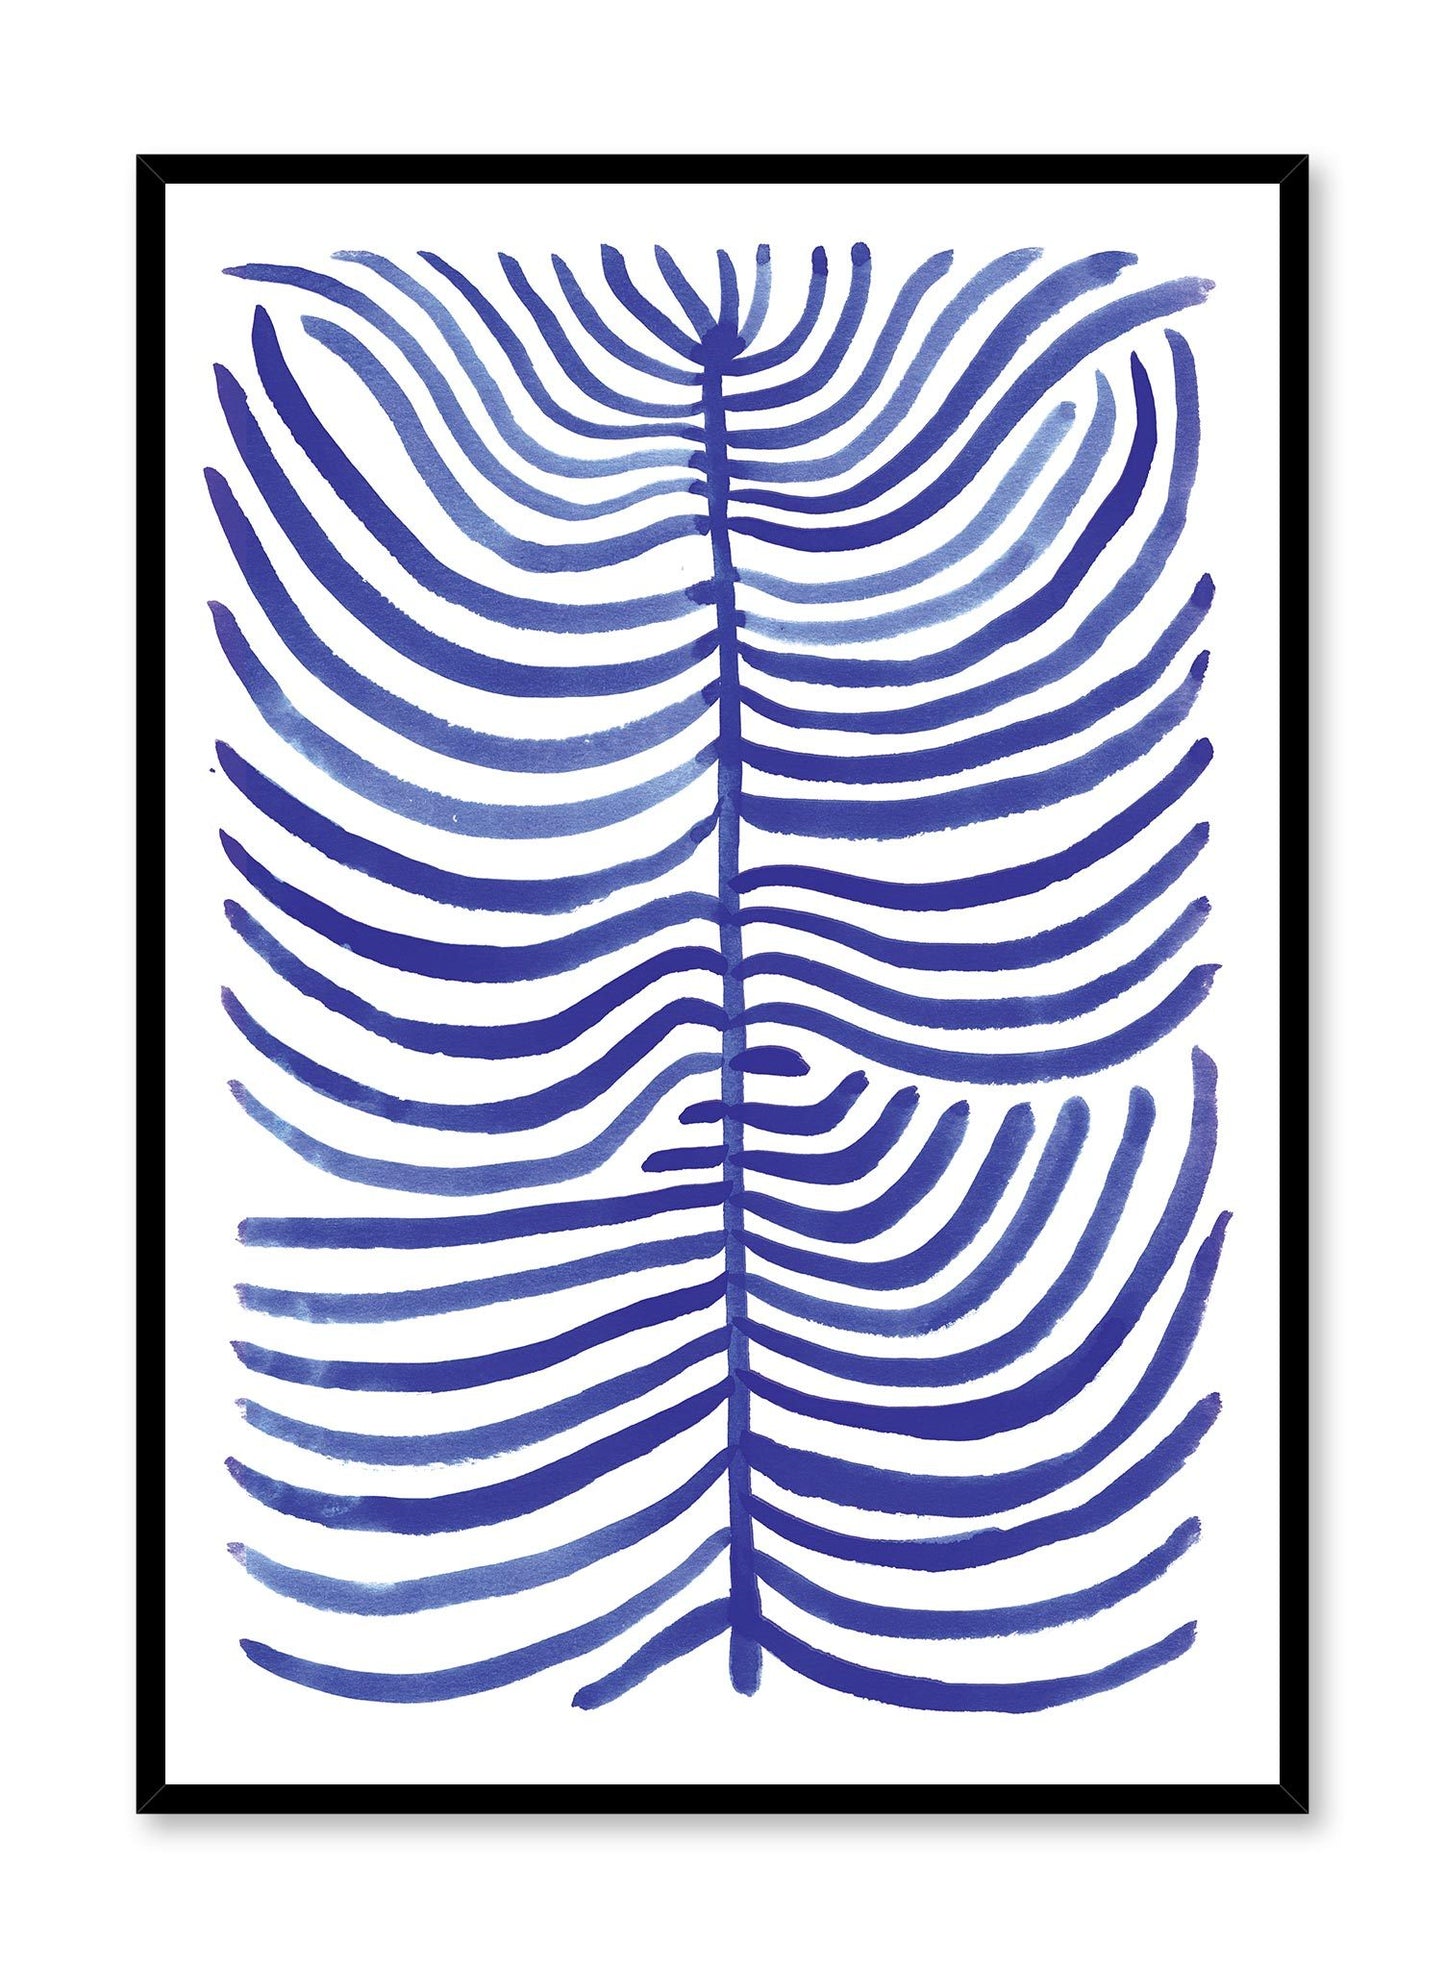 Botanical Veins is a minimalist illustration by Opposite Wall of a blue long branch extending outwards.